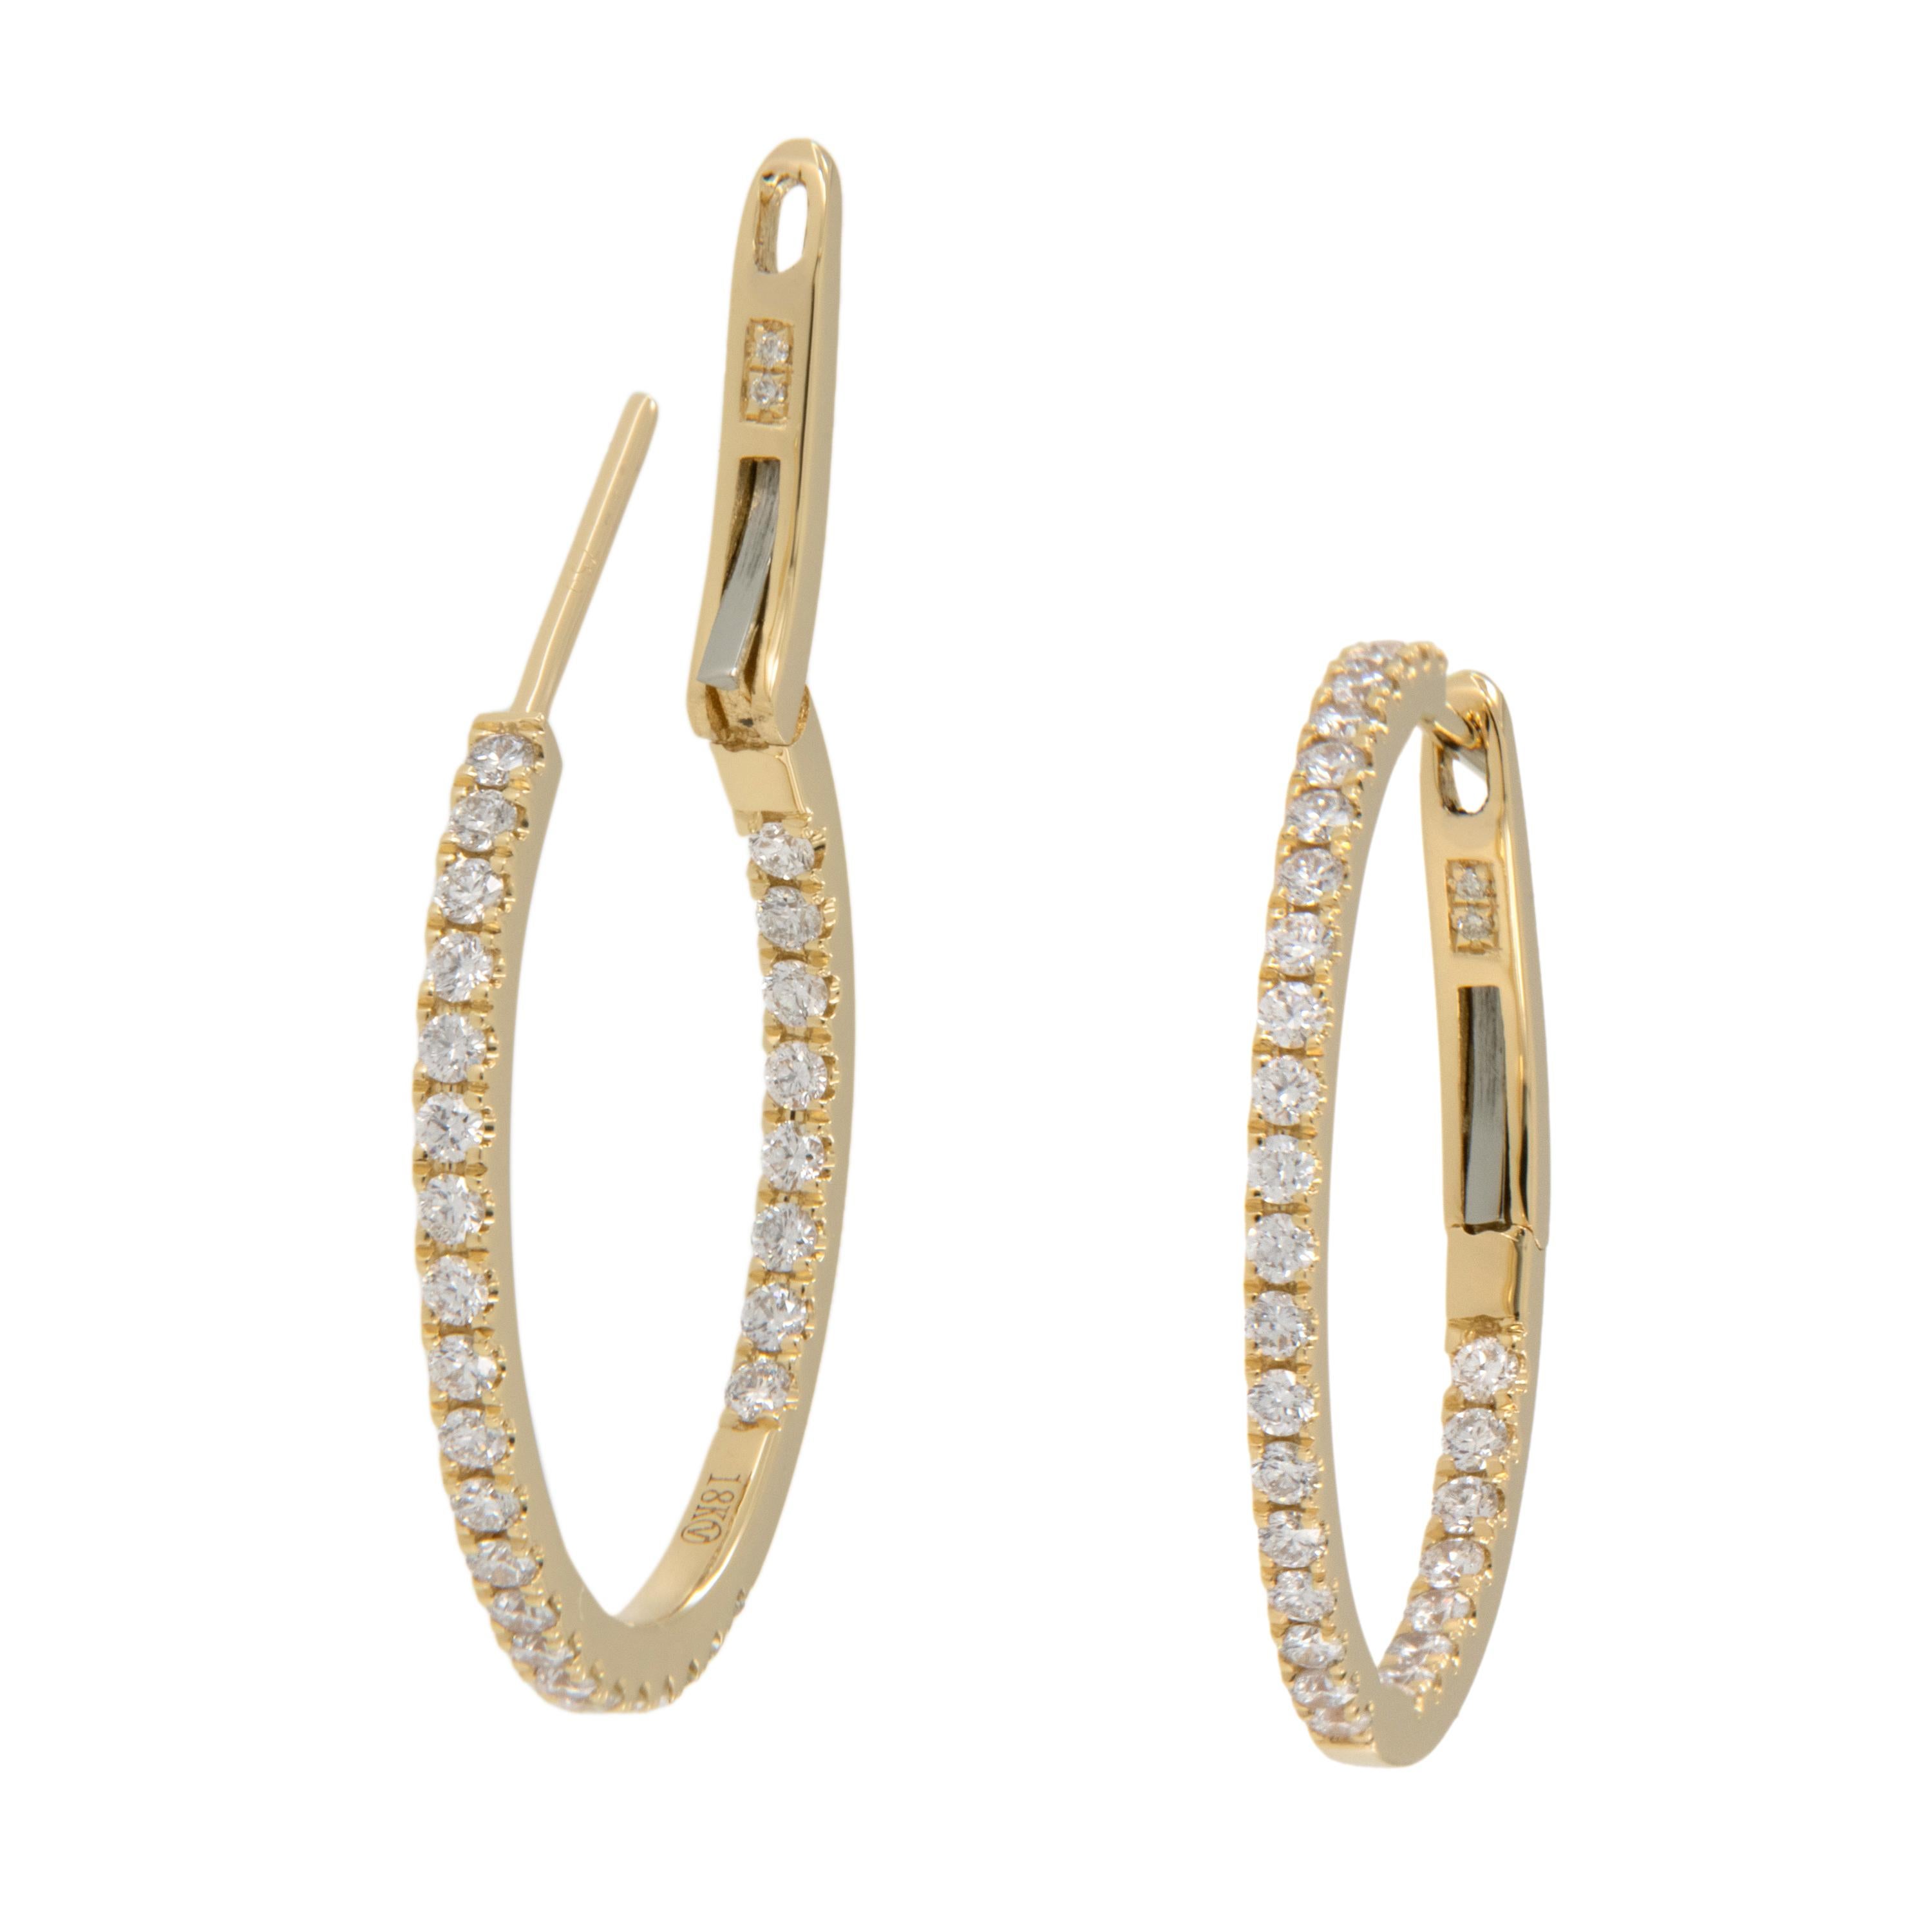 These are the most durable diamond hoops you can get - solid with no hinge to wear out or become loose. Top that off with rich 18 karat yellow gold and 62 RBC diamonds = 1.02 Cttw being VS - SI and F - G  color  you can't go wrong. Oh... notice the